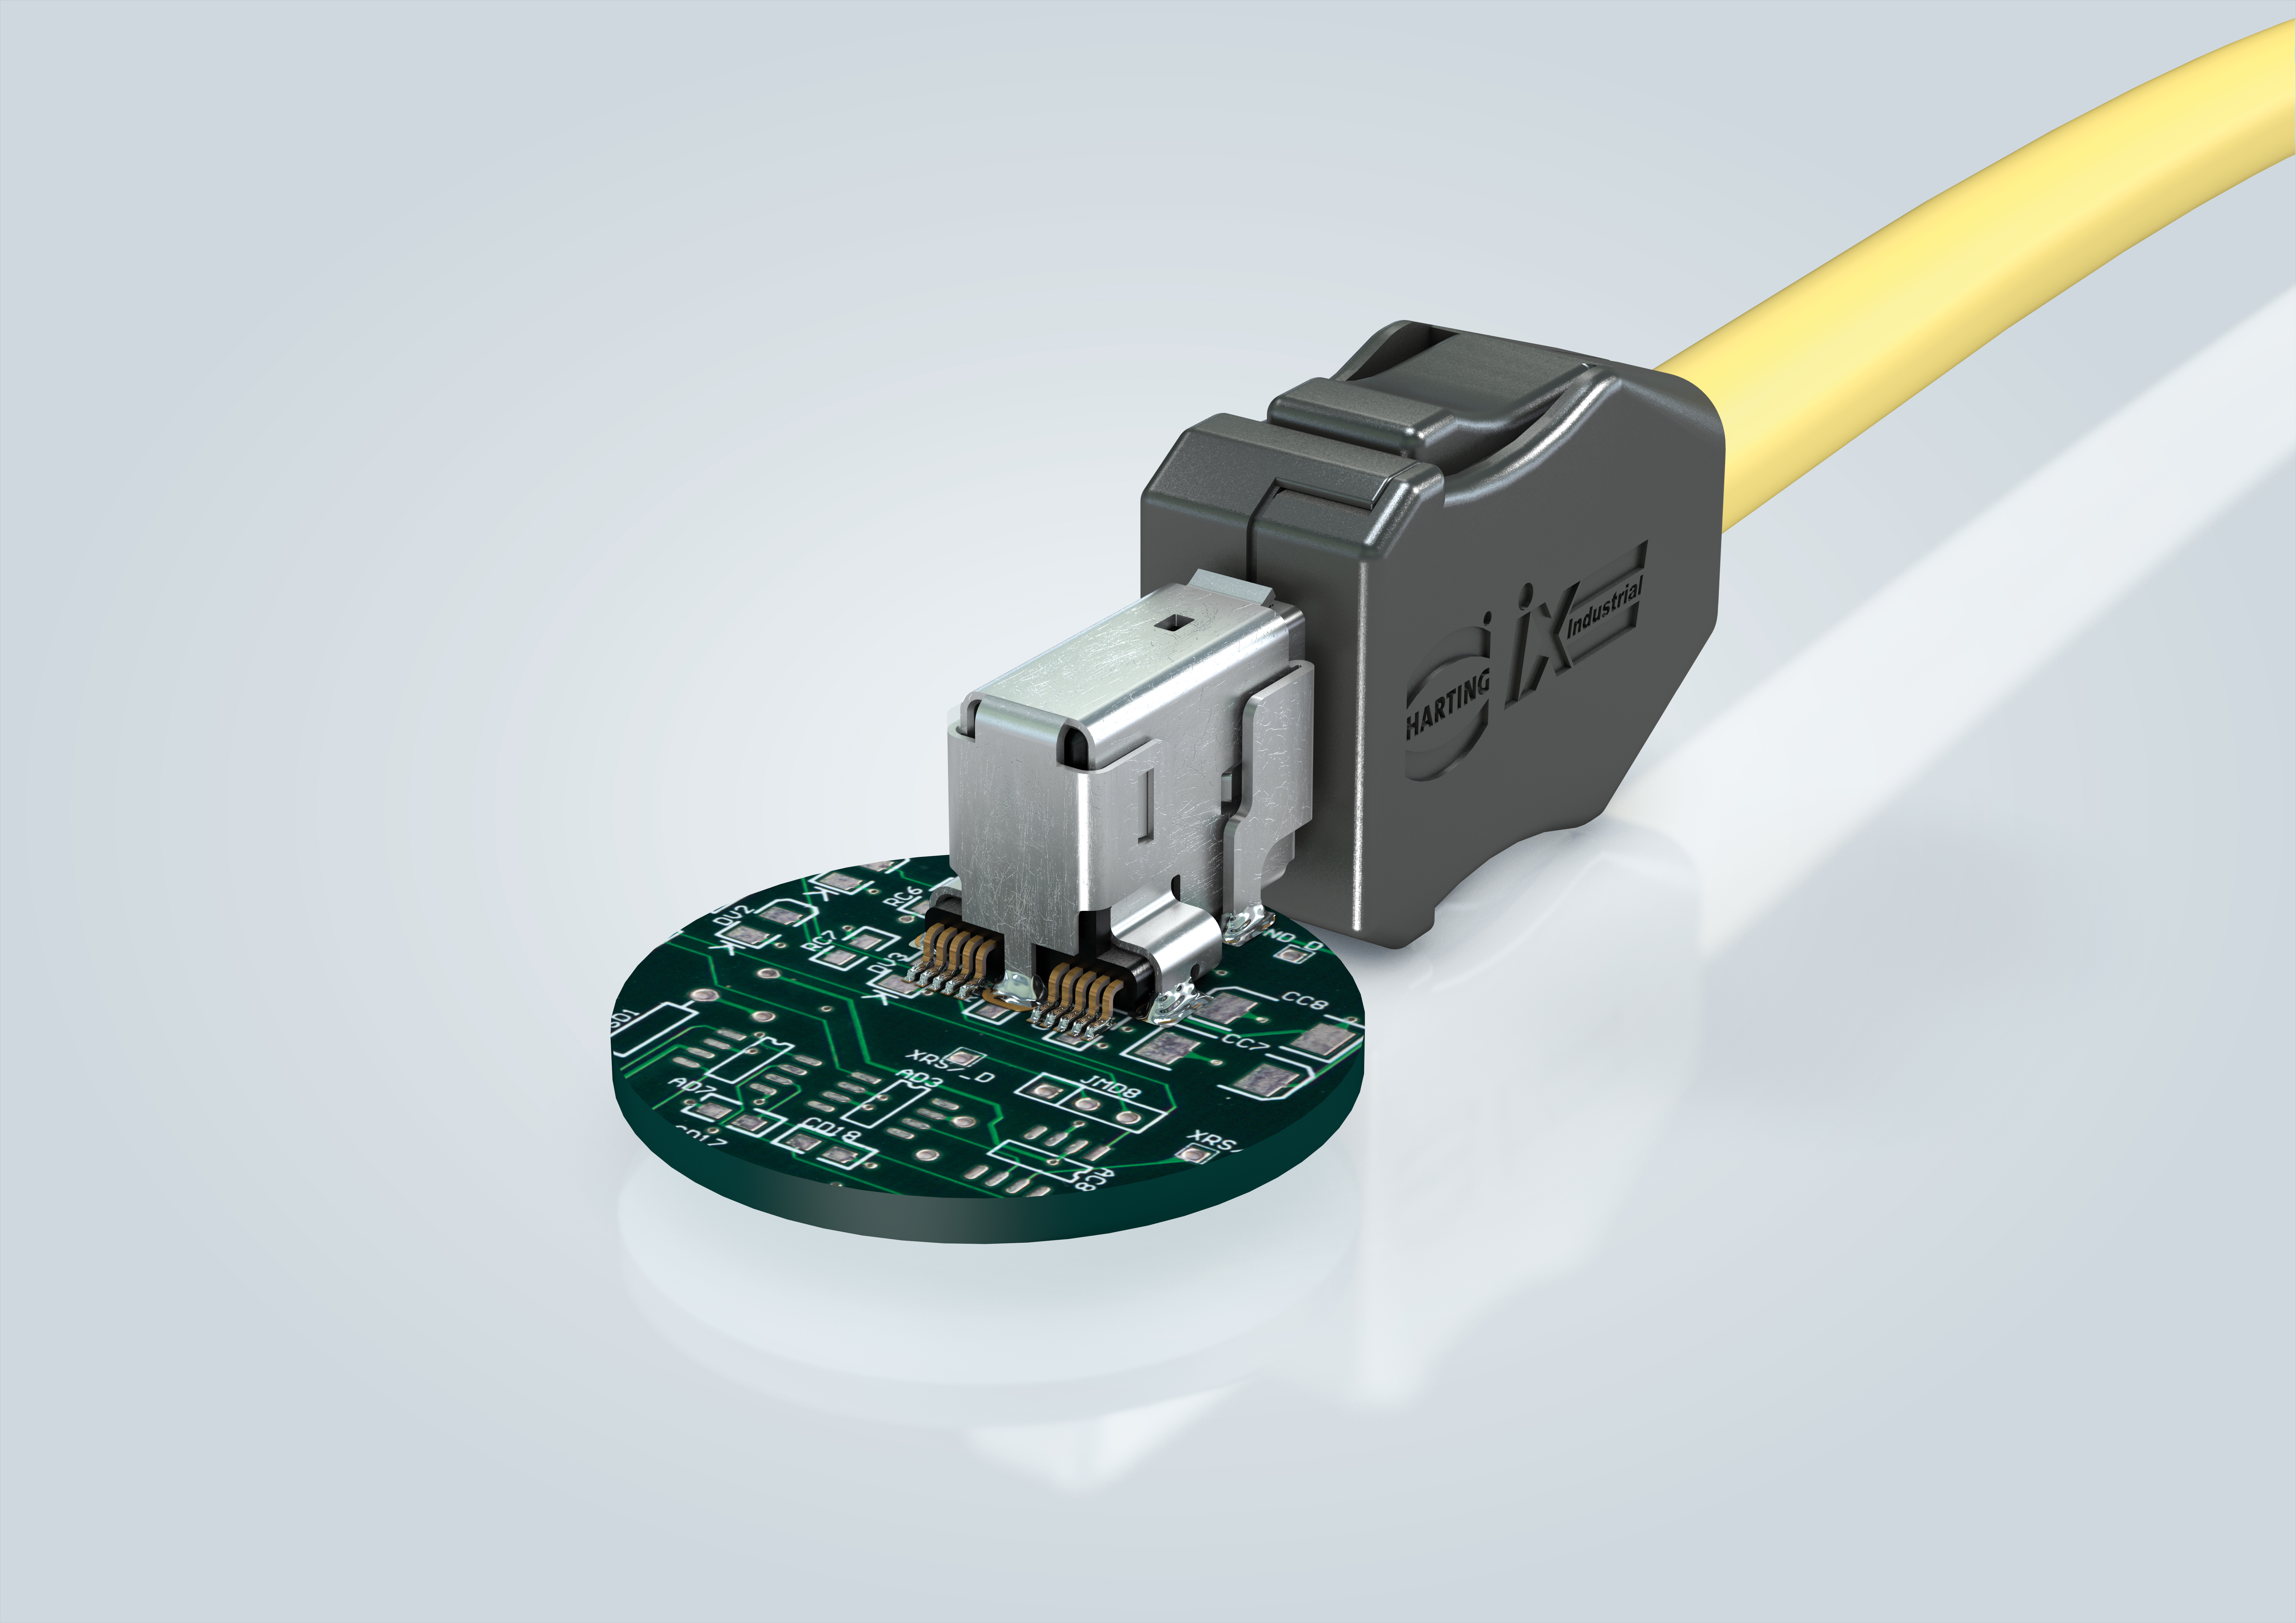 Demand for space-saving interconnection has led to the development of the iX Industrial connector.